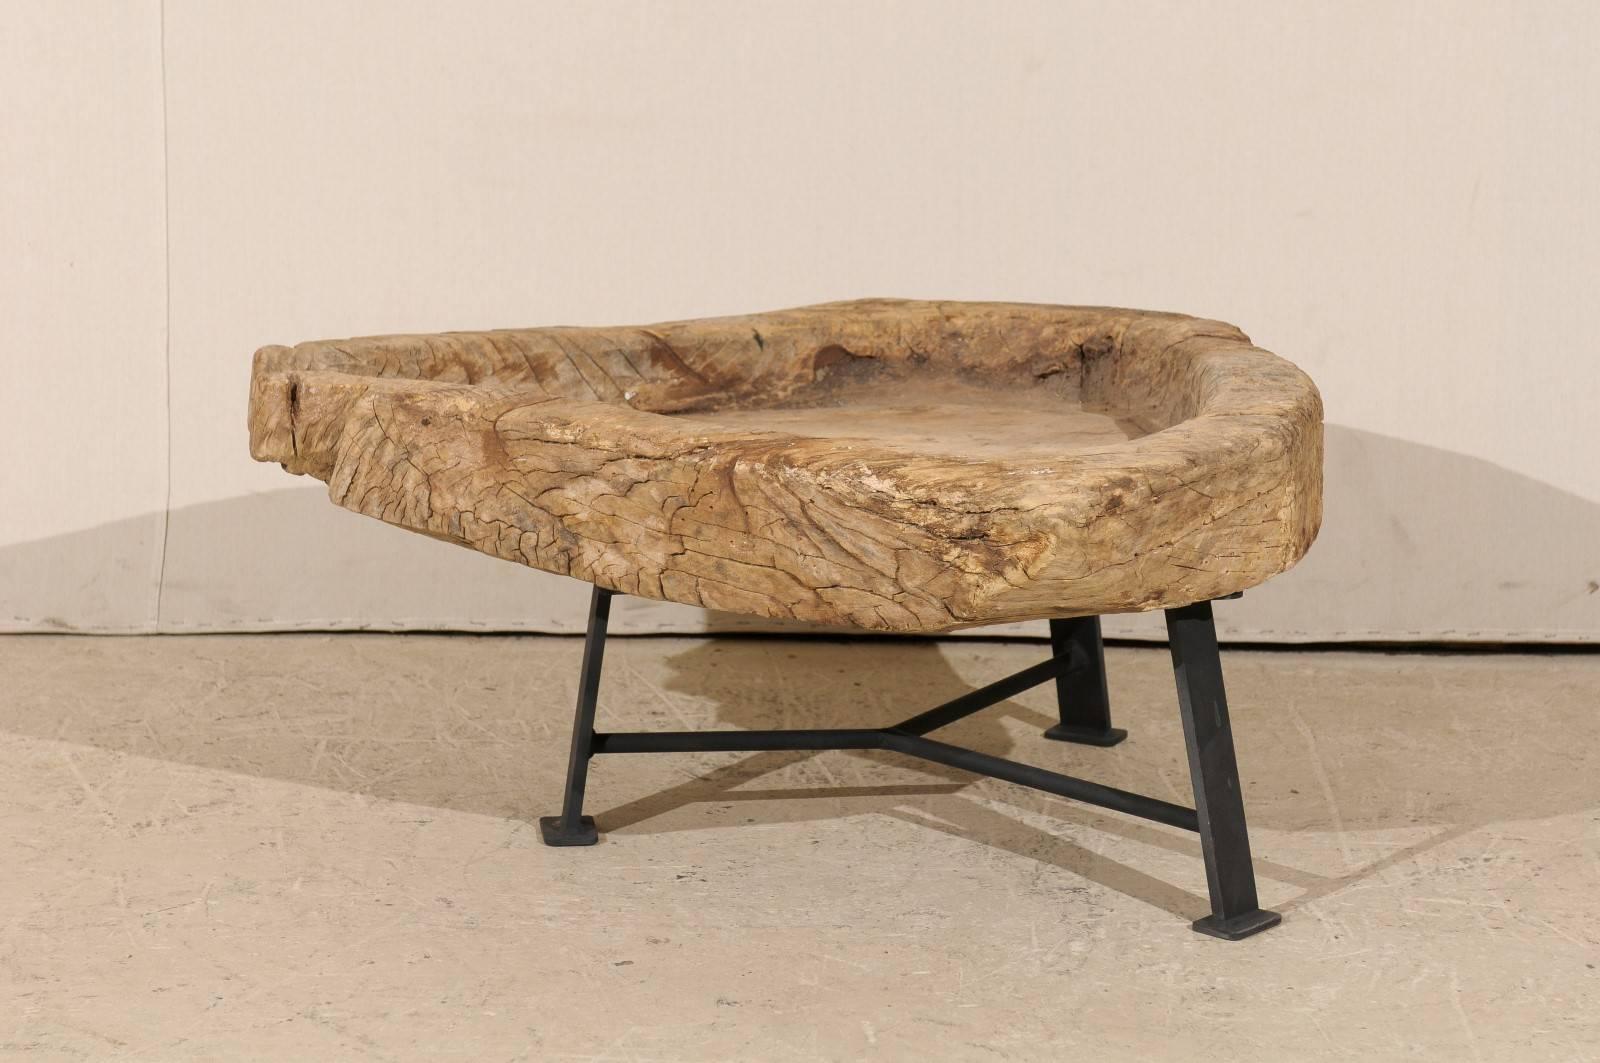 Guatemalan Rustic Natural Interestingly Shaped Coffee Table, Late 19th Century 3